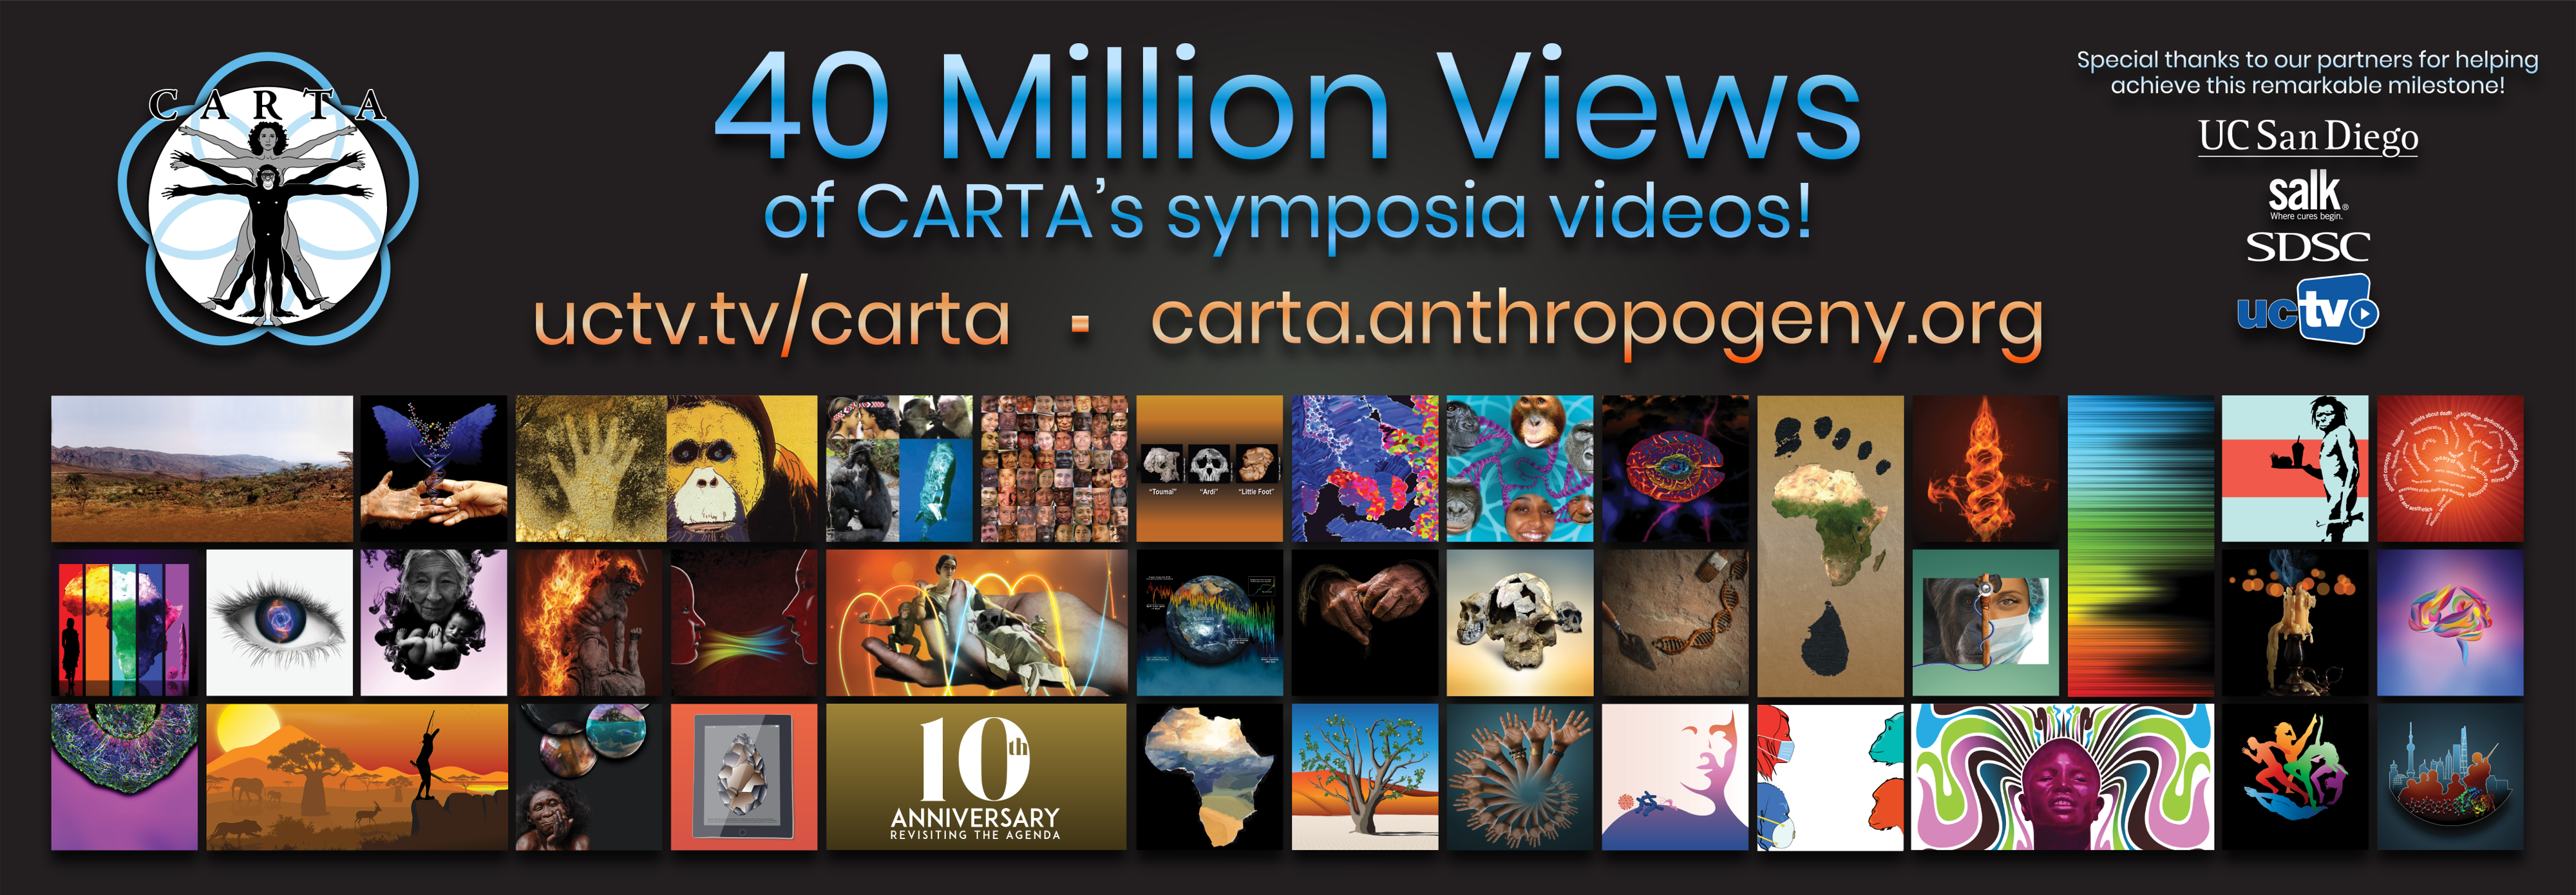 40 Million+ Video Views Milestone Highlights the Broad Appeal of CARTA Symposia